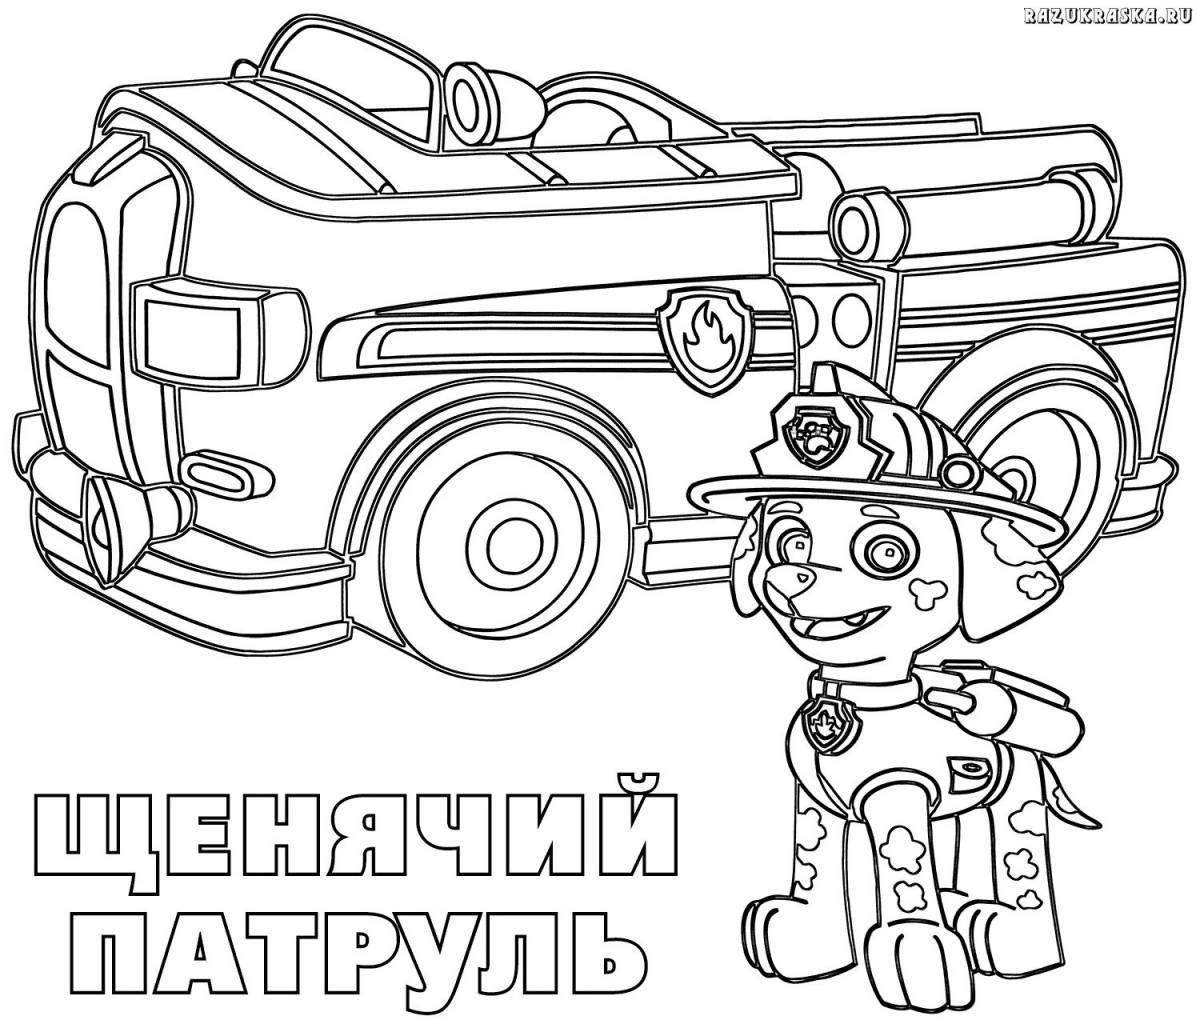 Colorful coloring page paw patrol with cars